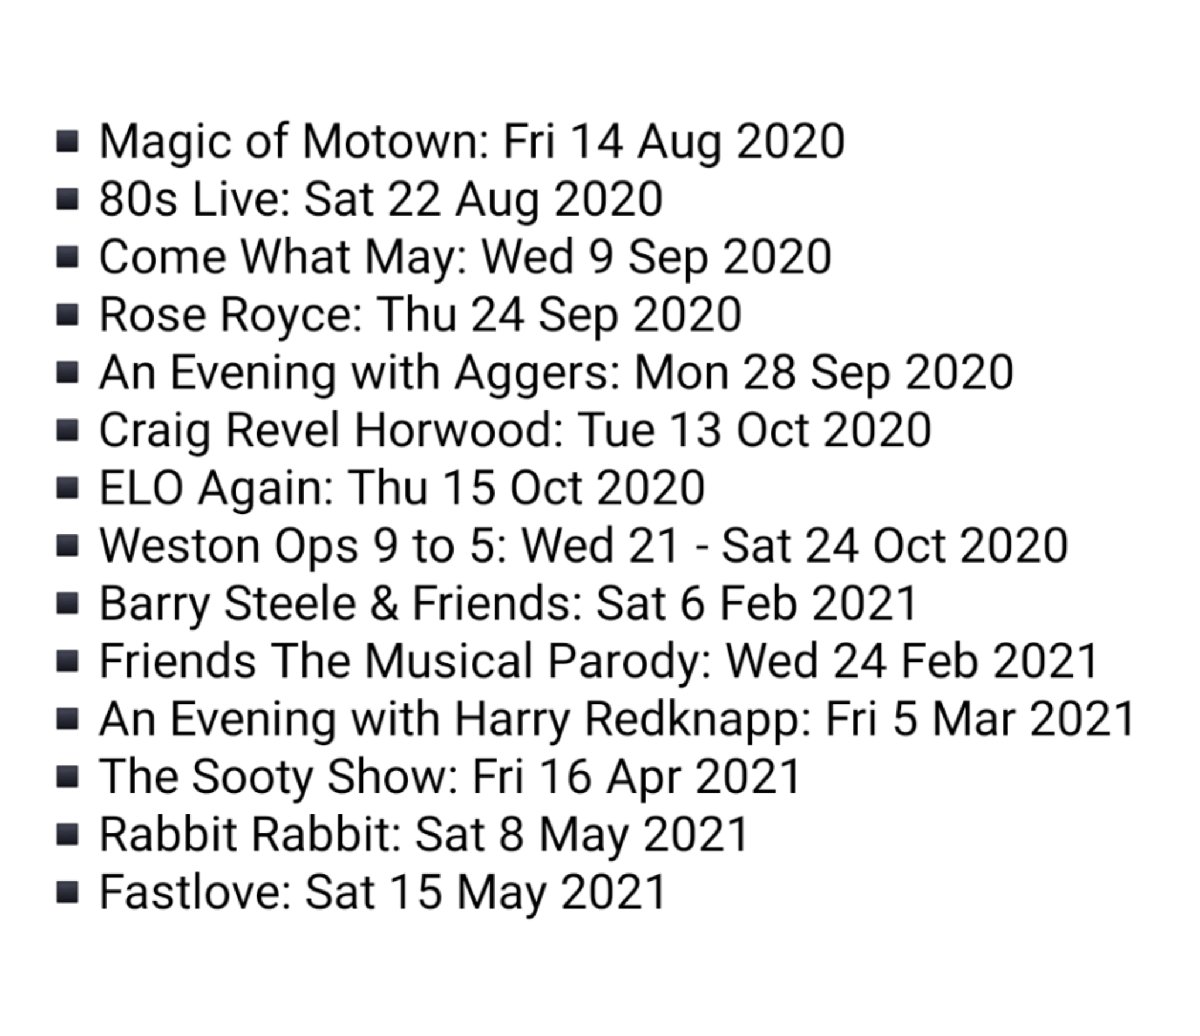 SHOW UPDATES - We can confirm the following shows have been rescheduled to future performance dates. More updates will follow.